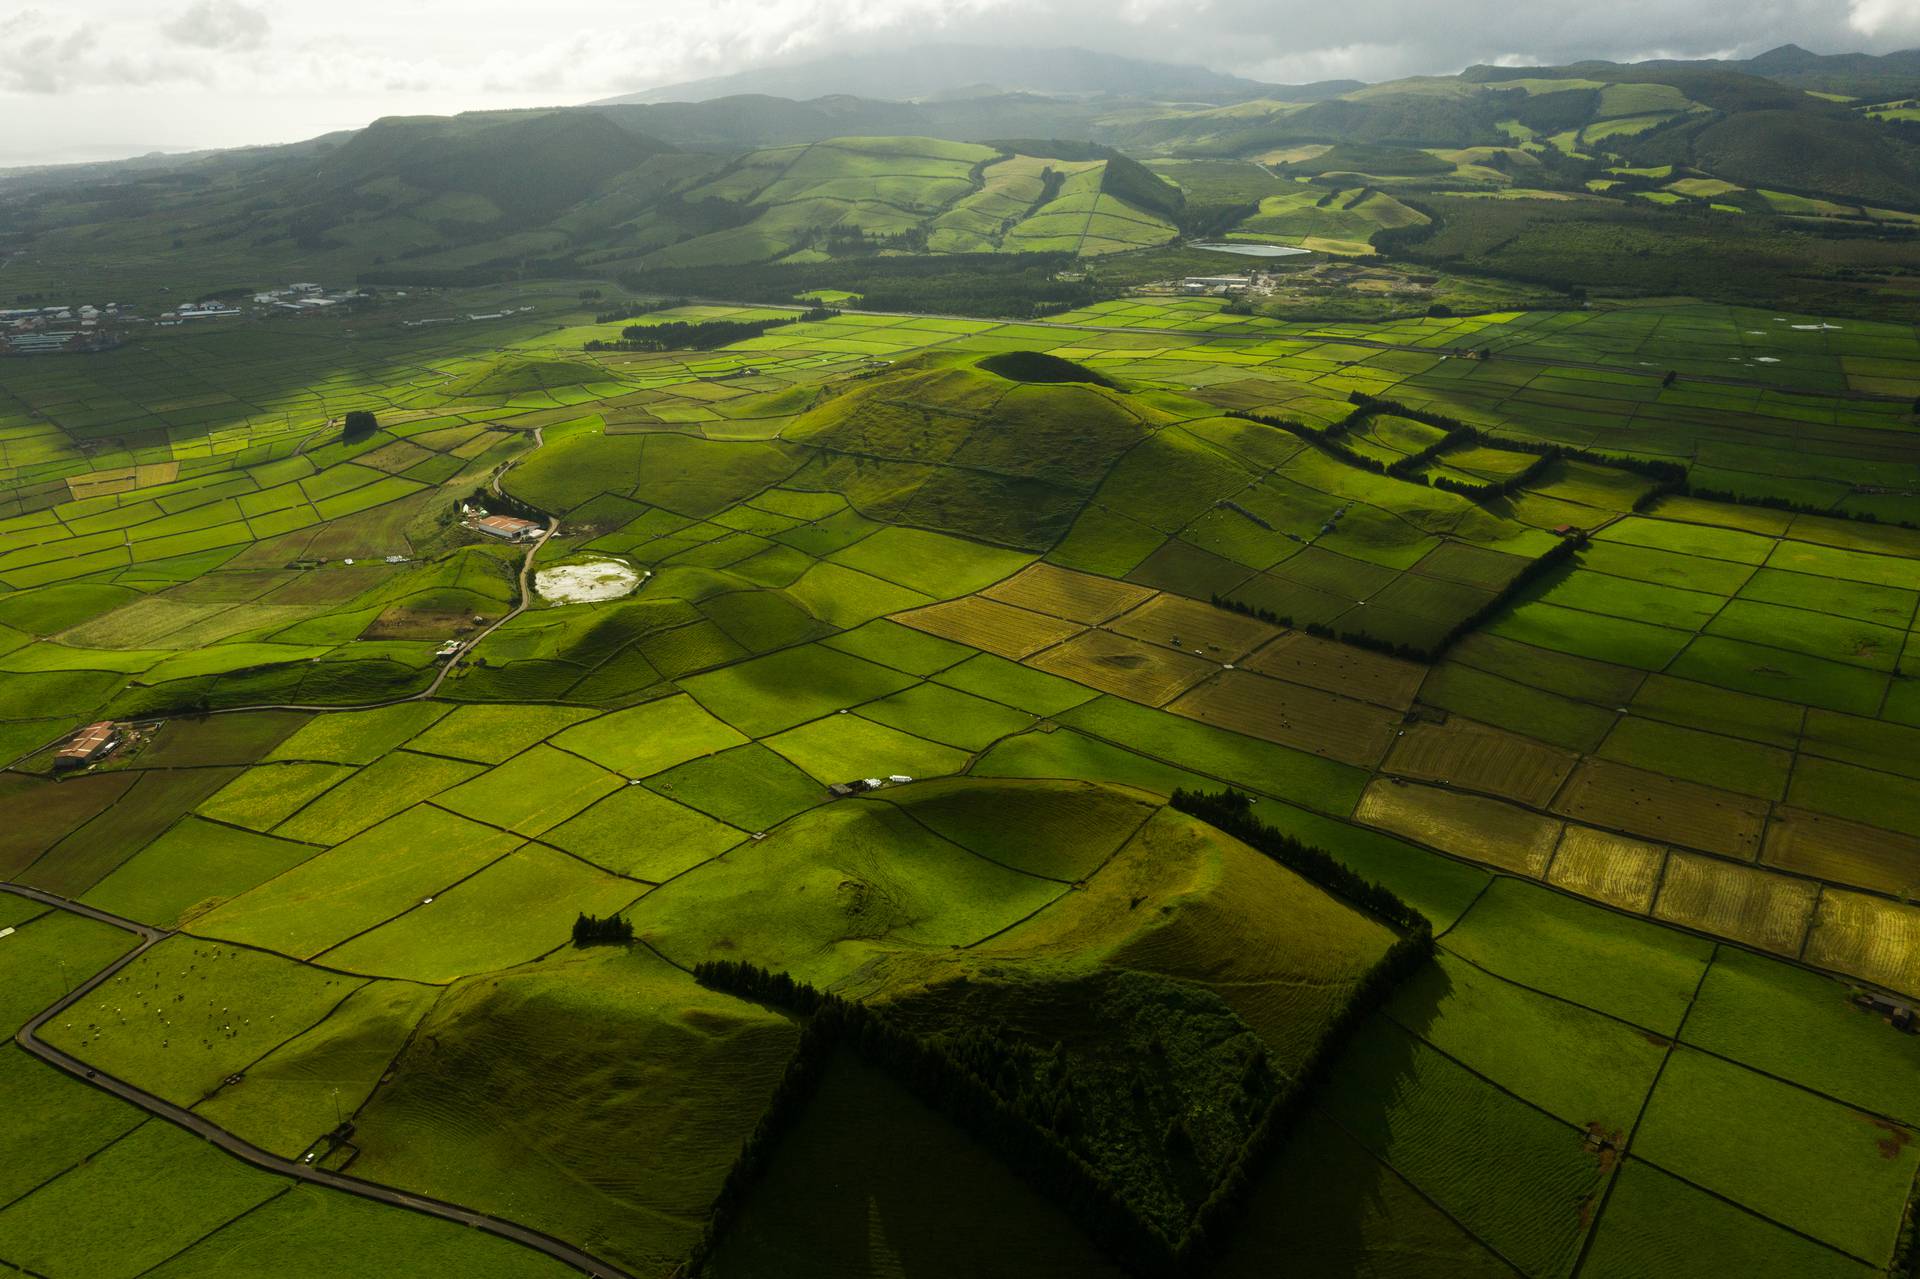 Aerial view of green fields in Terceira Island, The Azores. Is the Azores just Ireland in disguise